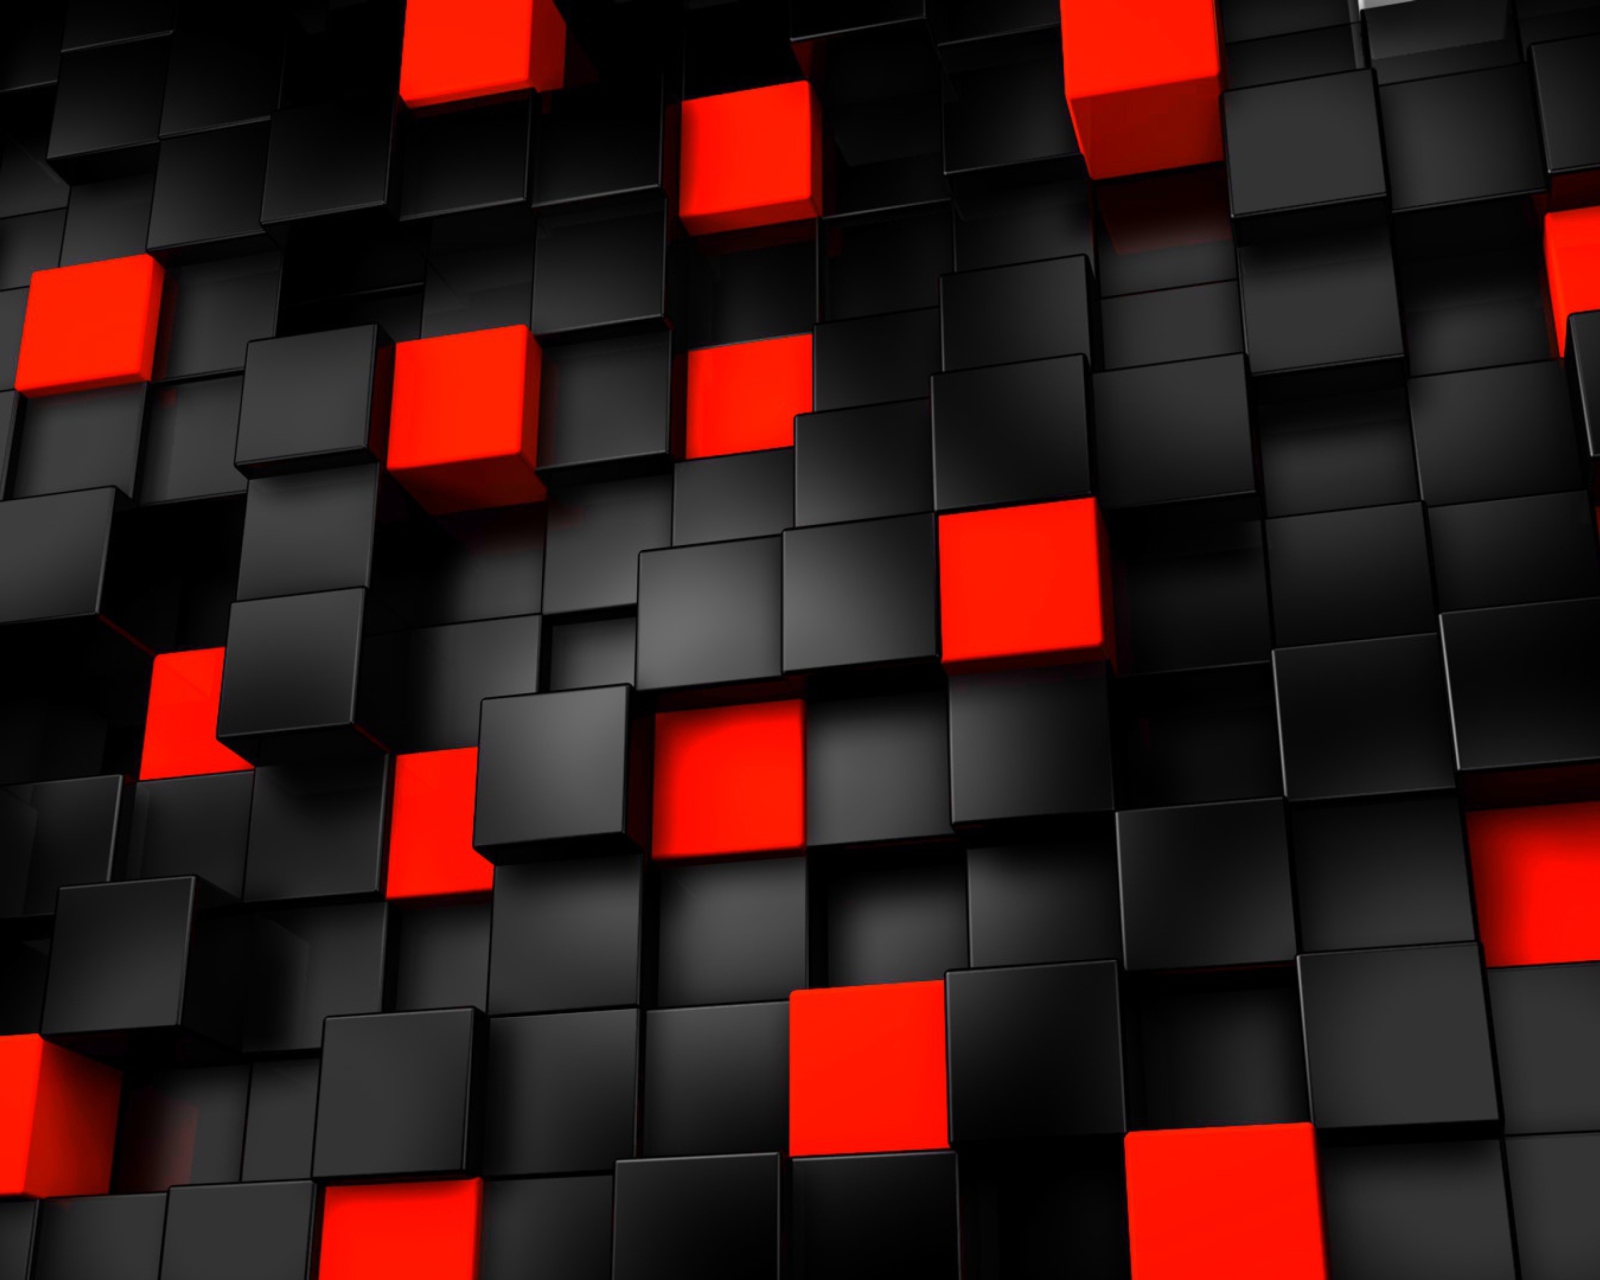 Sfondi Abstract Black And Red Cubes 1600x1280